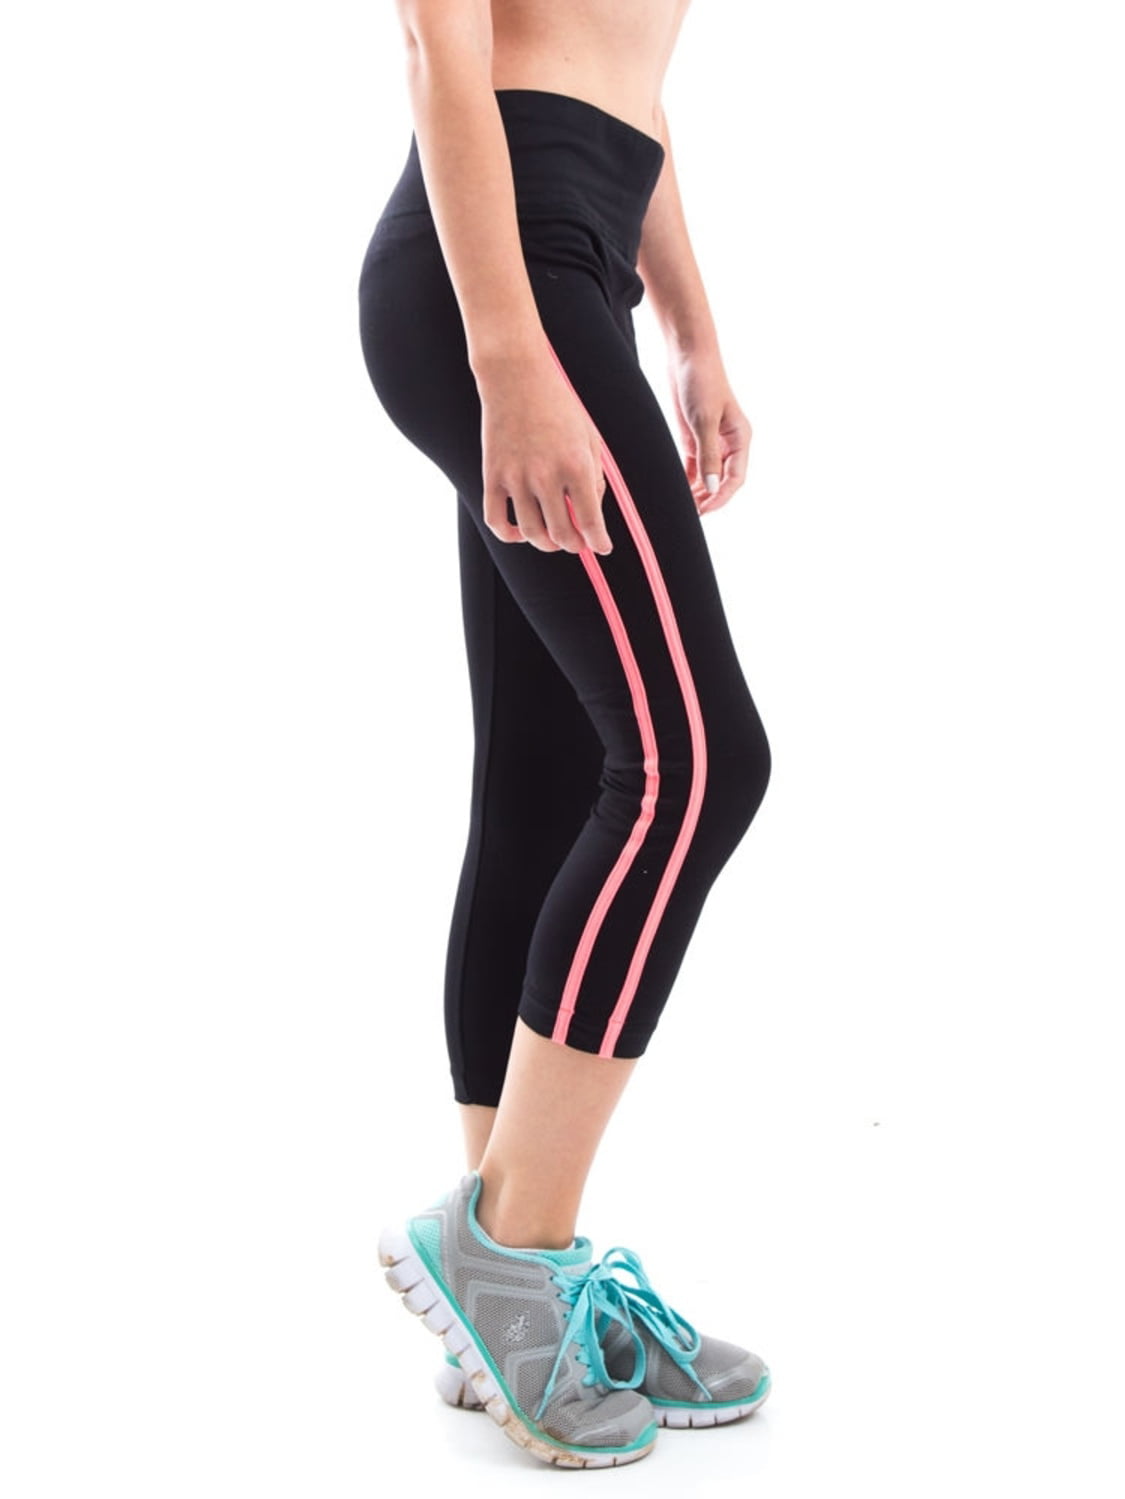 Simple Neon Workout Pants with Comfort Workout Clothes